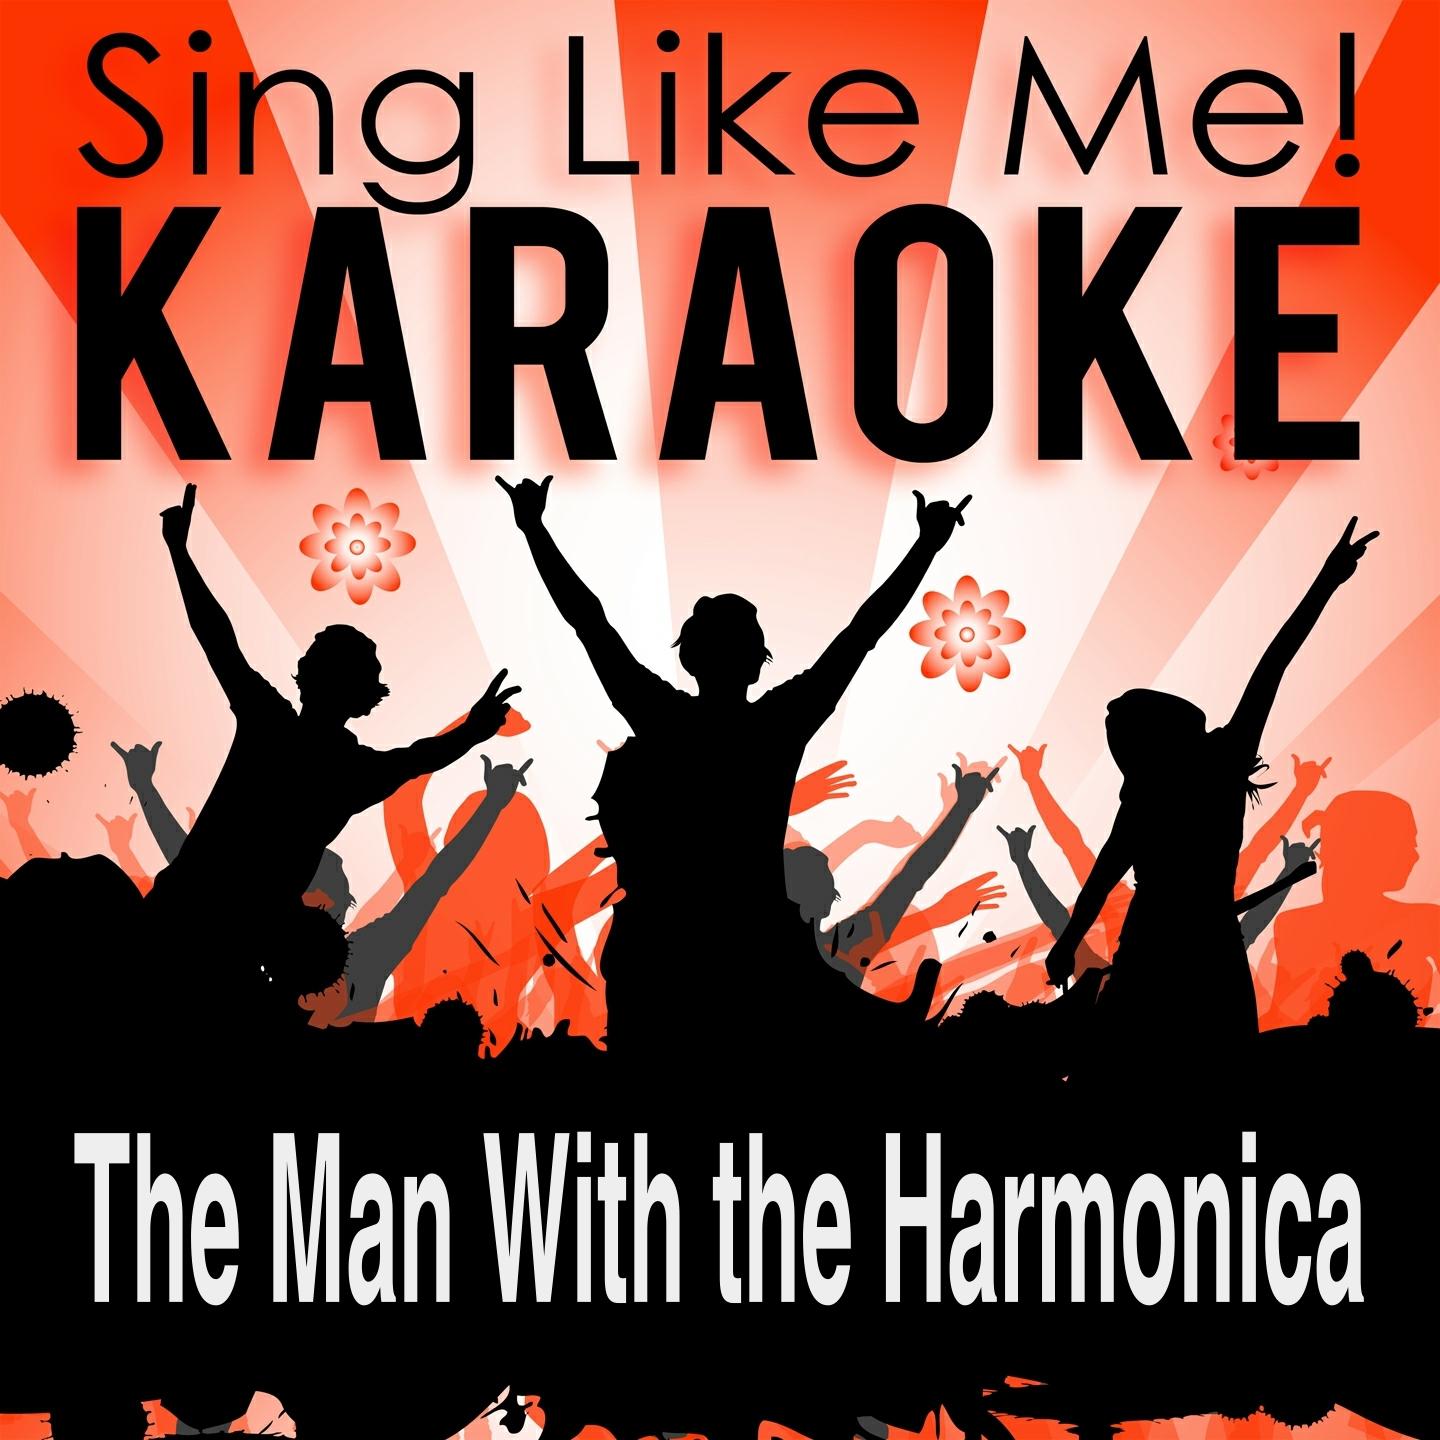 The Man with the Harmonica (Karaoke Version) (Originally Performed By Ennio Morricone)